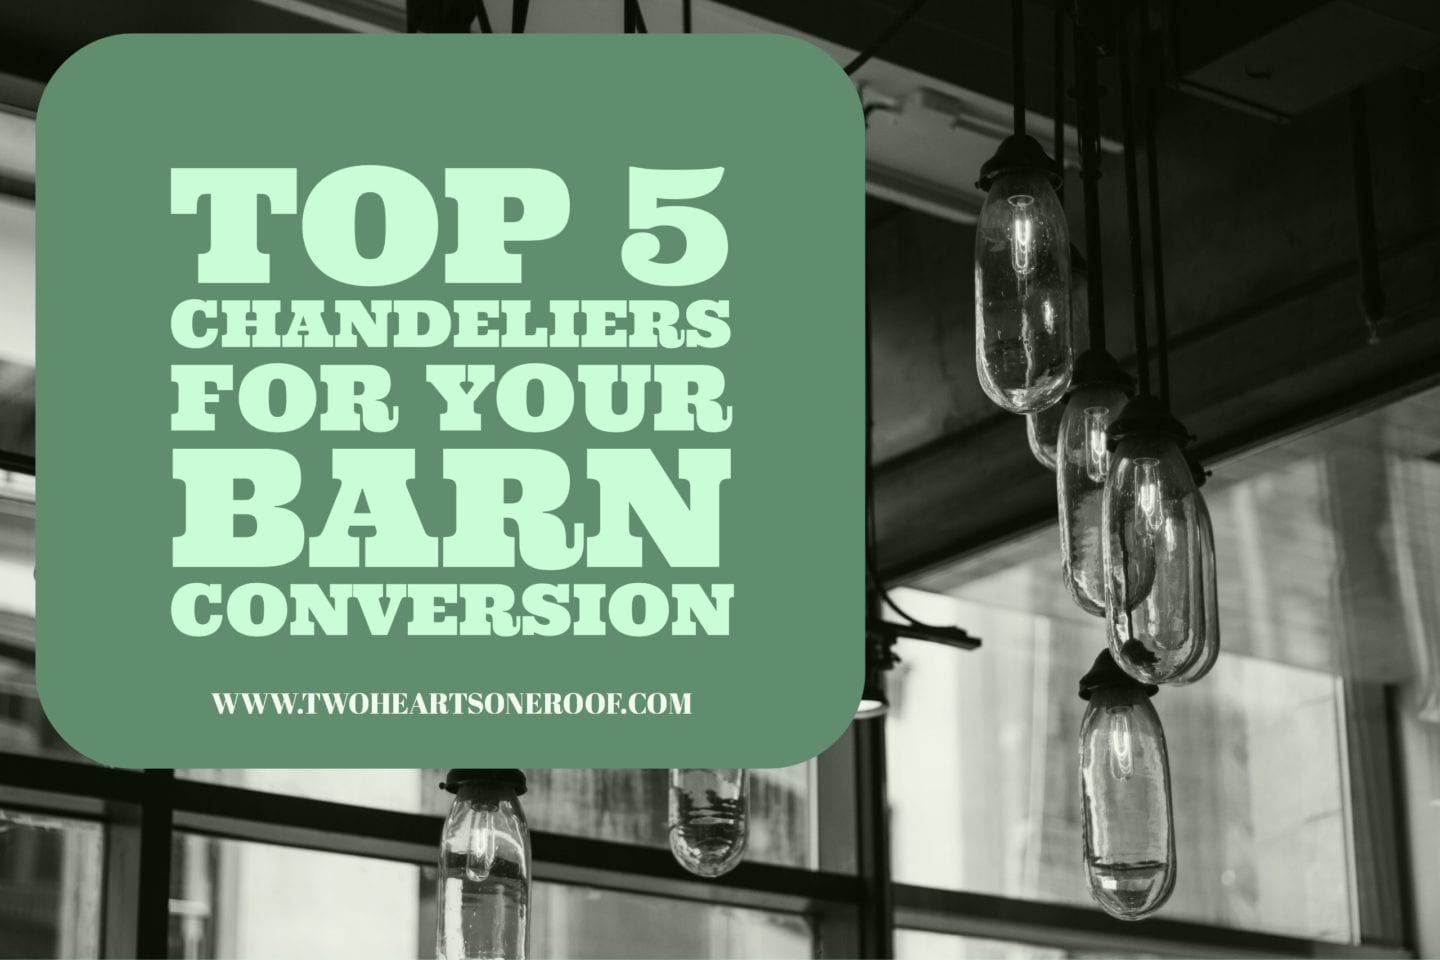 Guest Post from Dal Tavernor – Top 5 Chandeliers For Your Barn Conversion